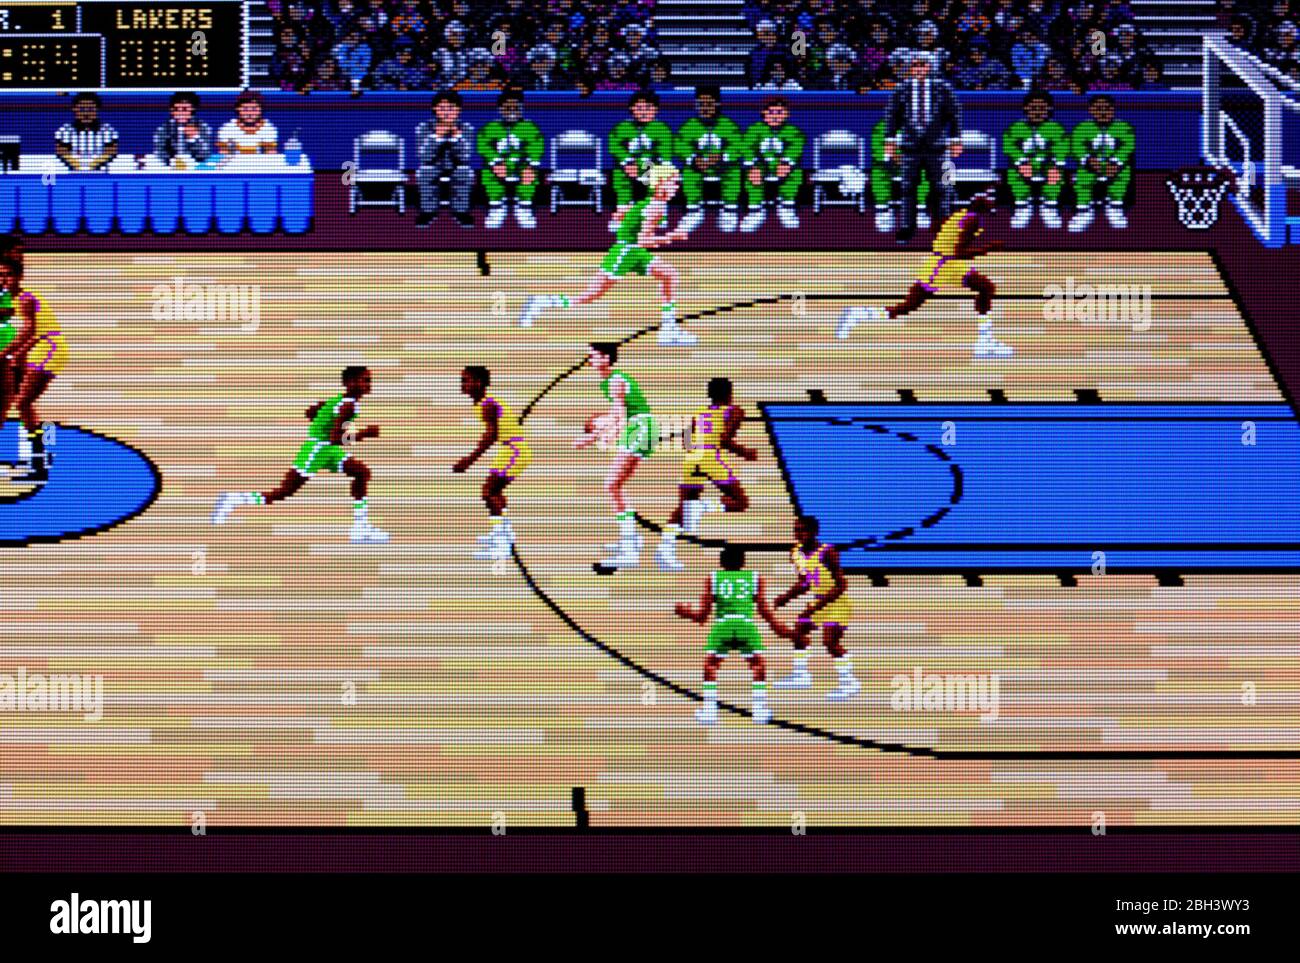 Lakers versus Celtics and the NBA Playoffs - Sega Genesis Mega Drive - Editorial use only Stock Photo